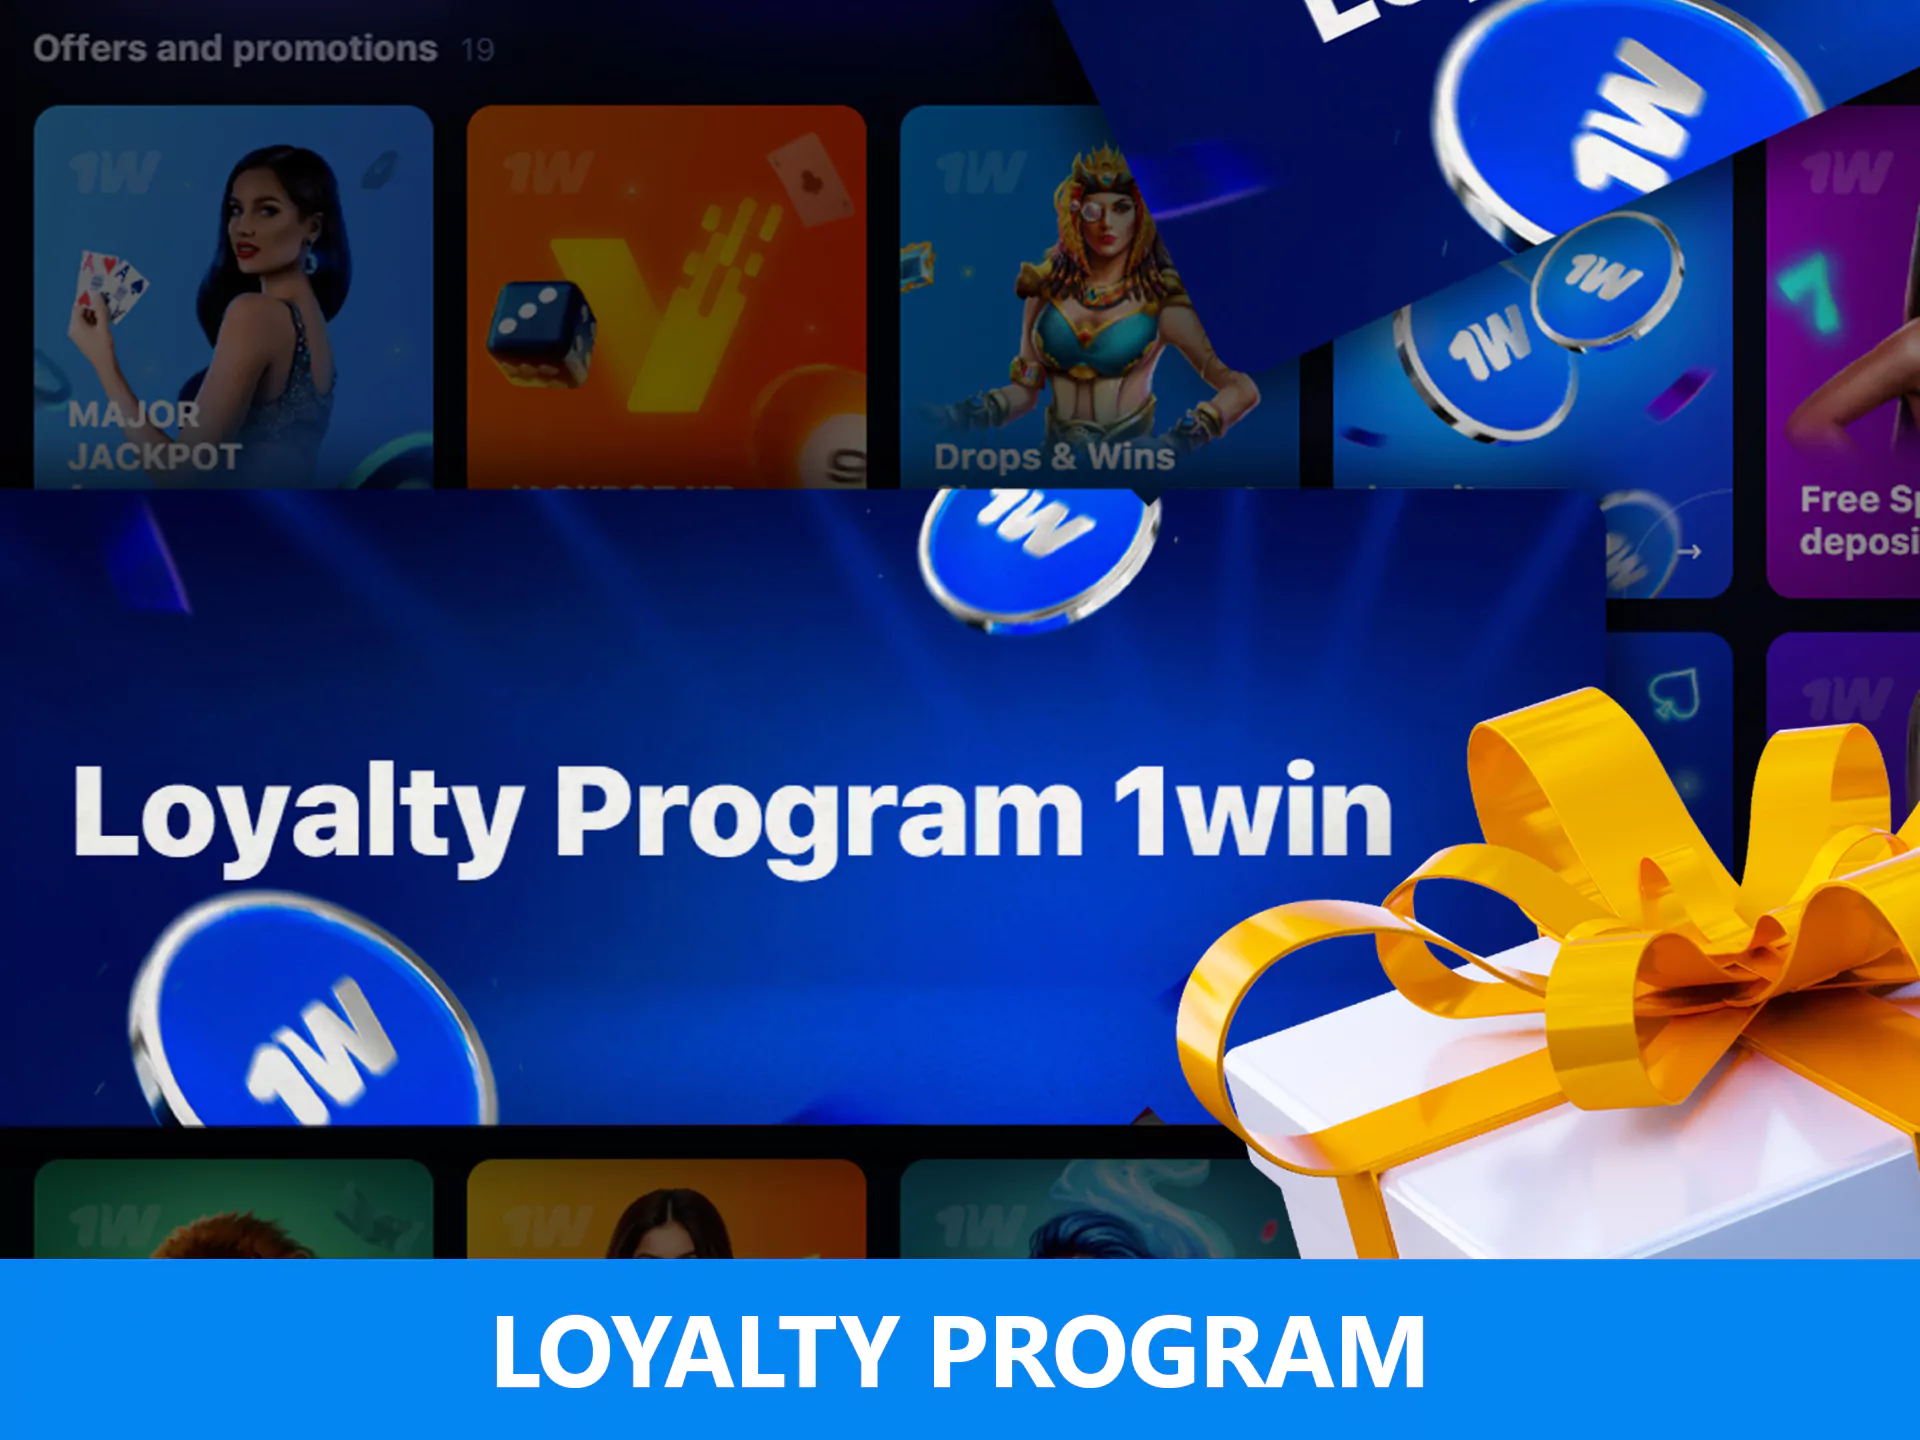 The clients of the loyalty program have additional benefits at 1win.